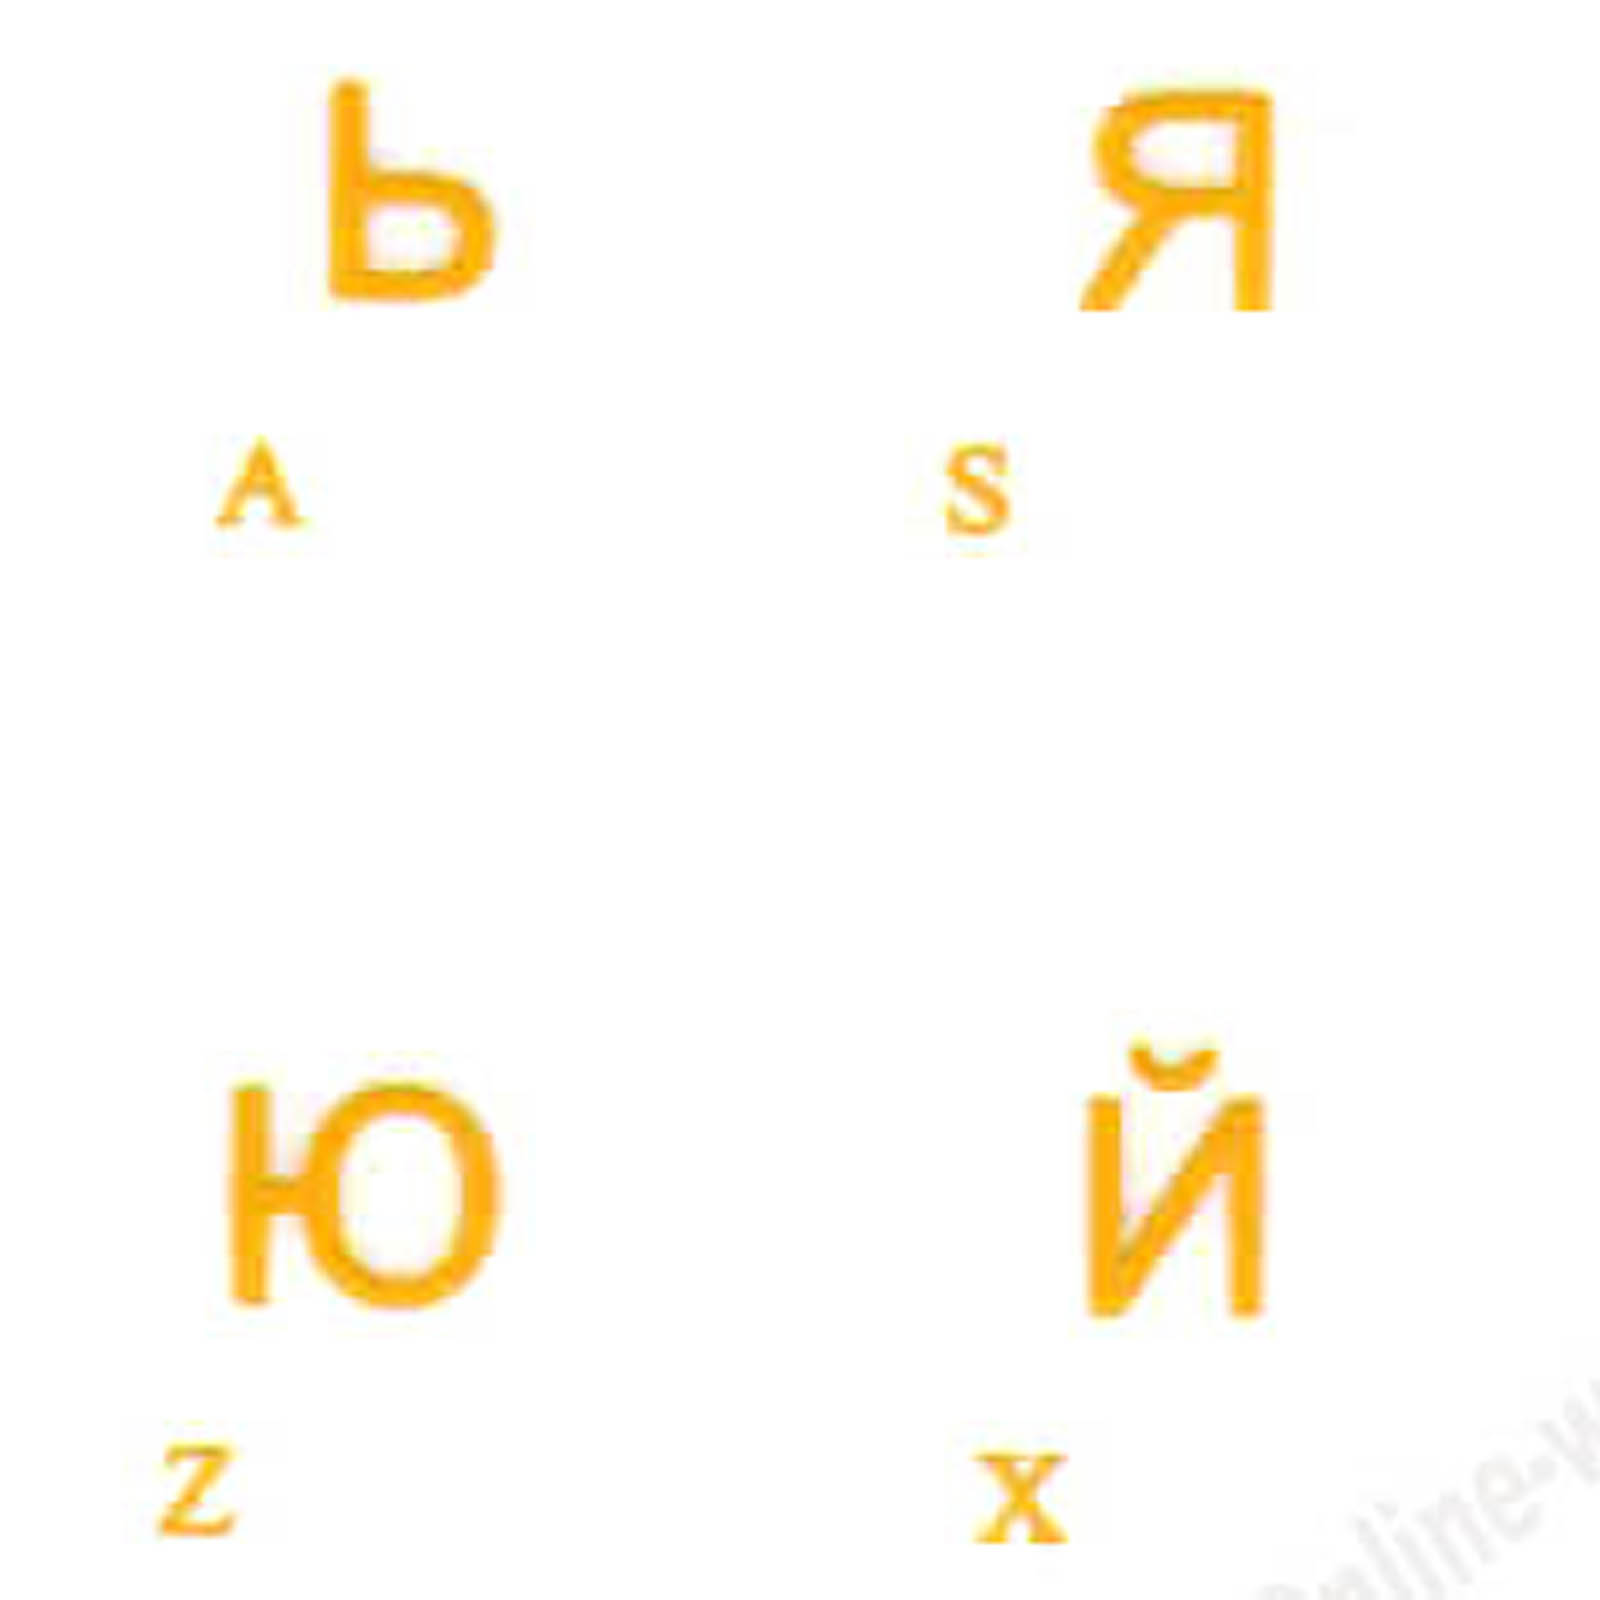 BULGARIAN STICKERS YELLOW LETTERS TRANSPARENT BACKGROUND